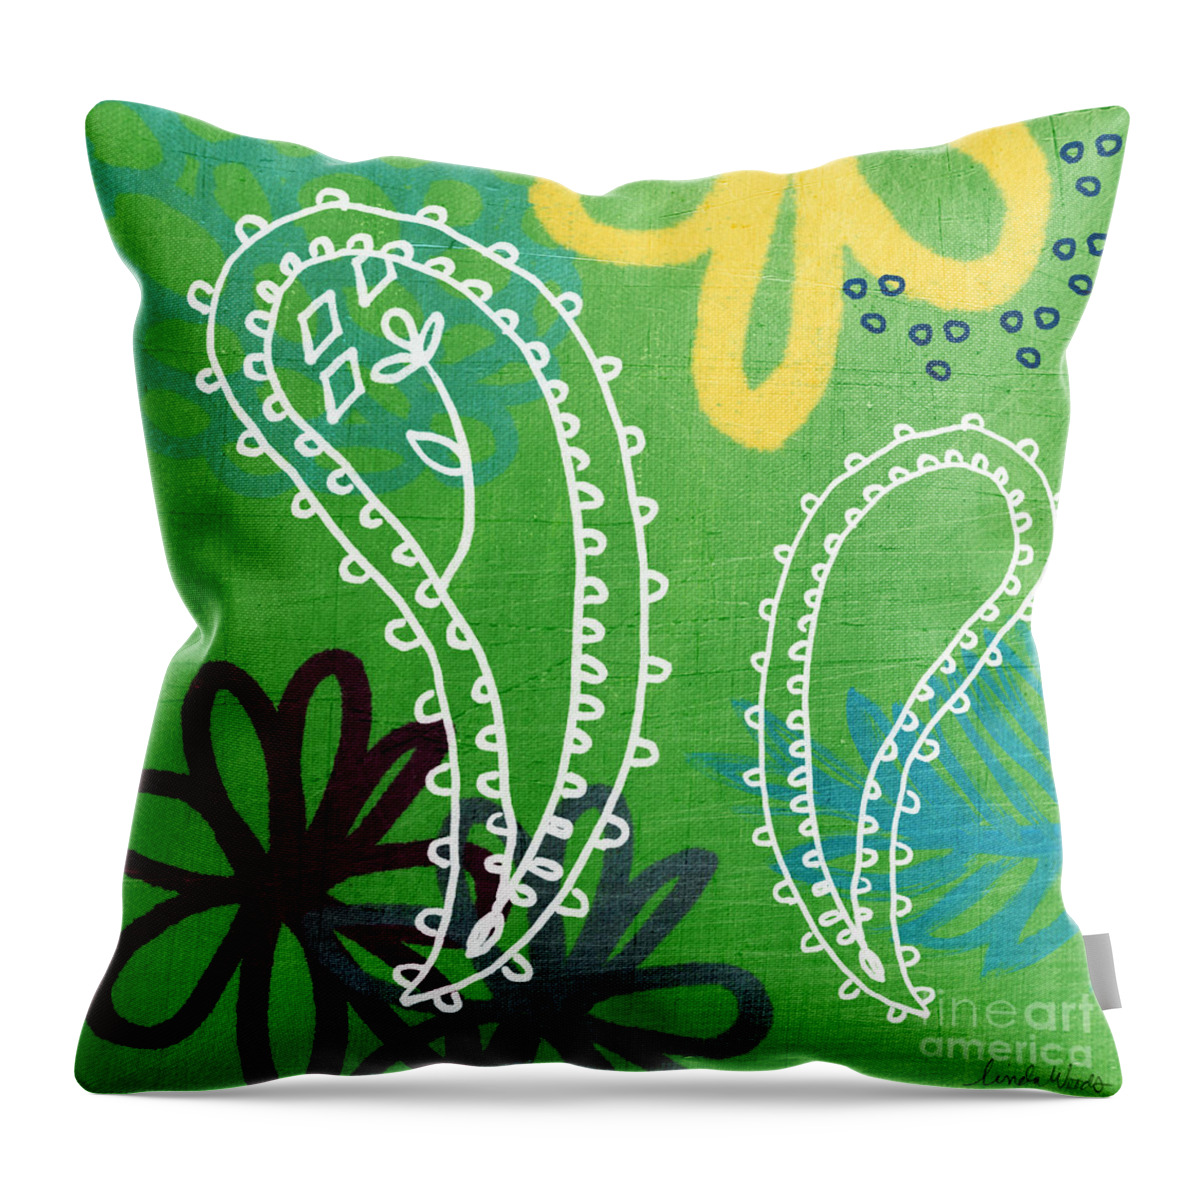 Paisley Throw Pillow featuring the painting Green Paisley Garden by Linda Woods